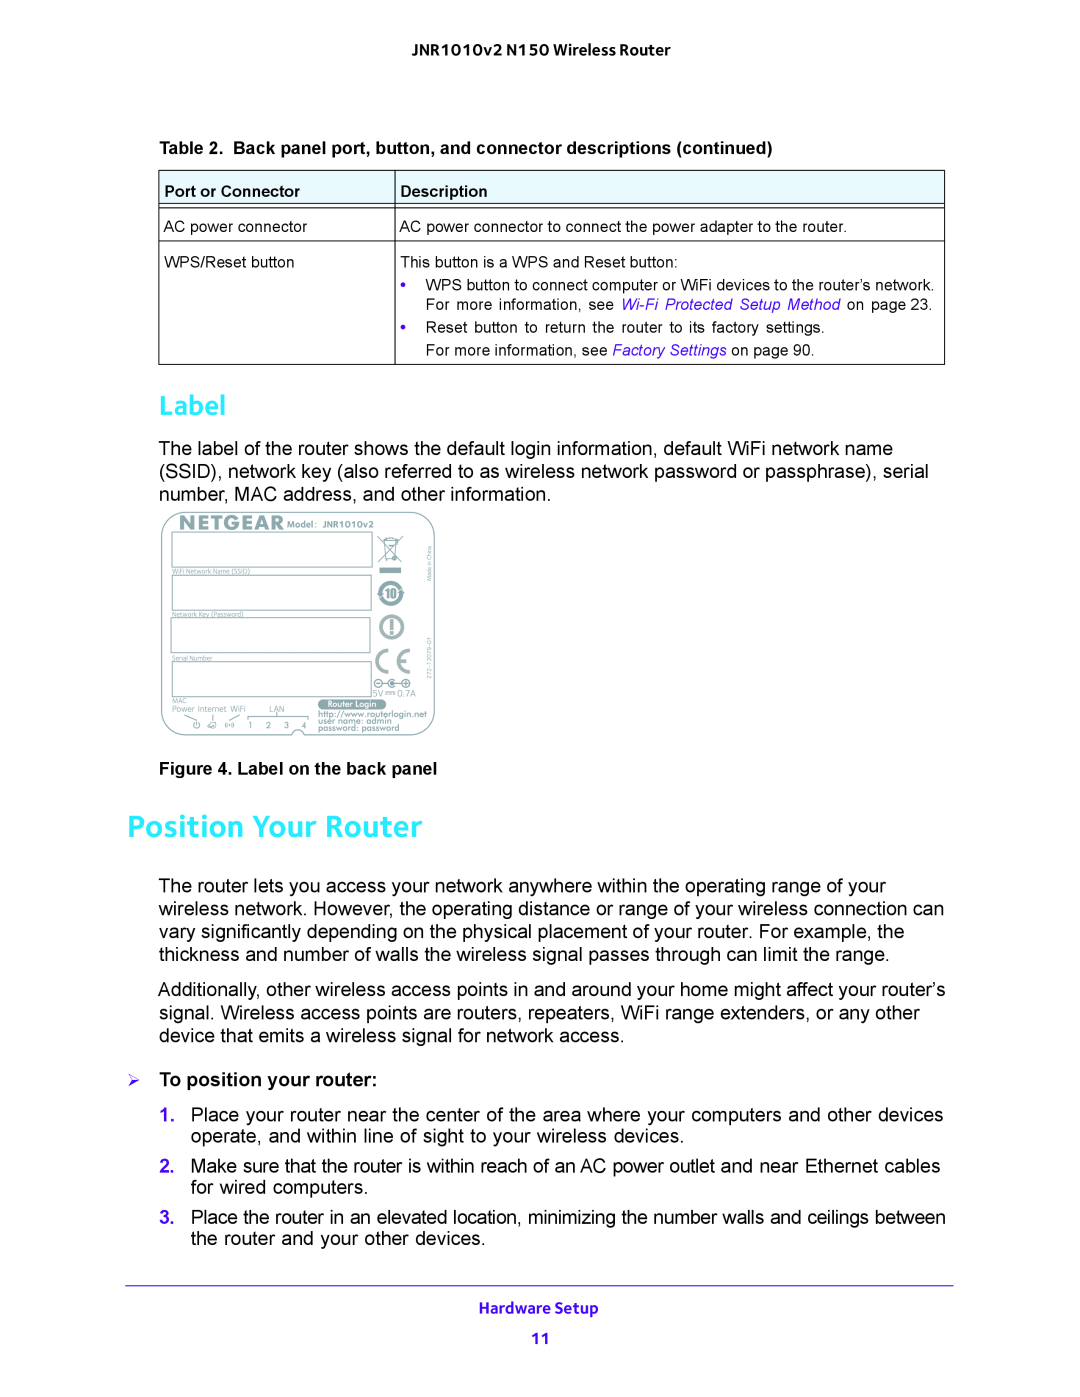 NETGEAR JNR1010V2 user manual Position Your Router, Label,  To position your router 